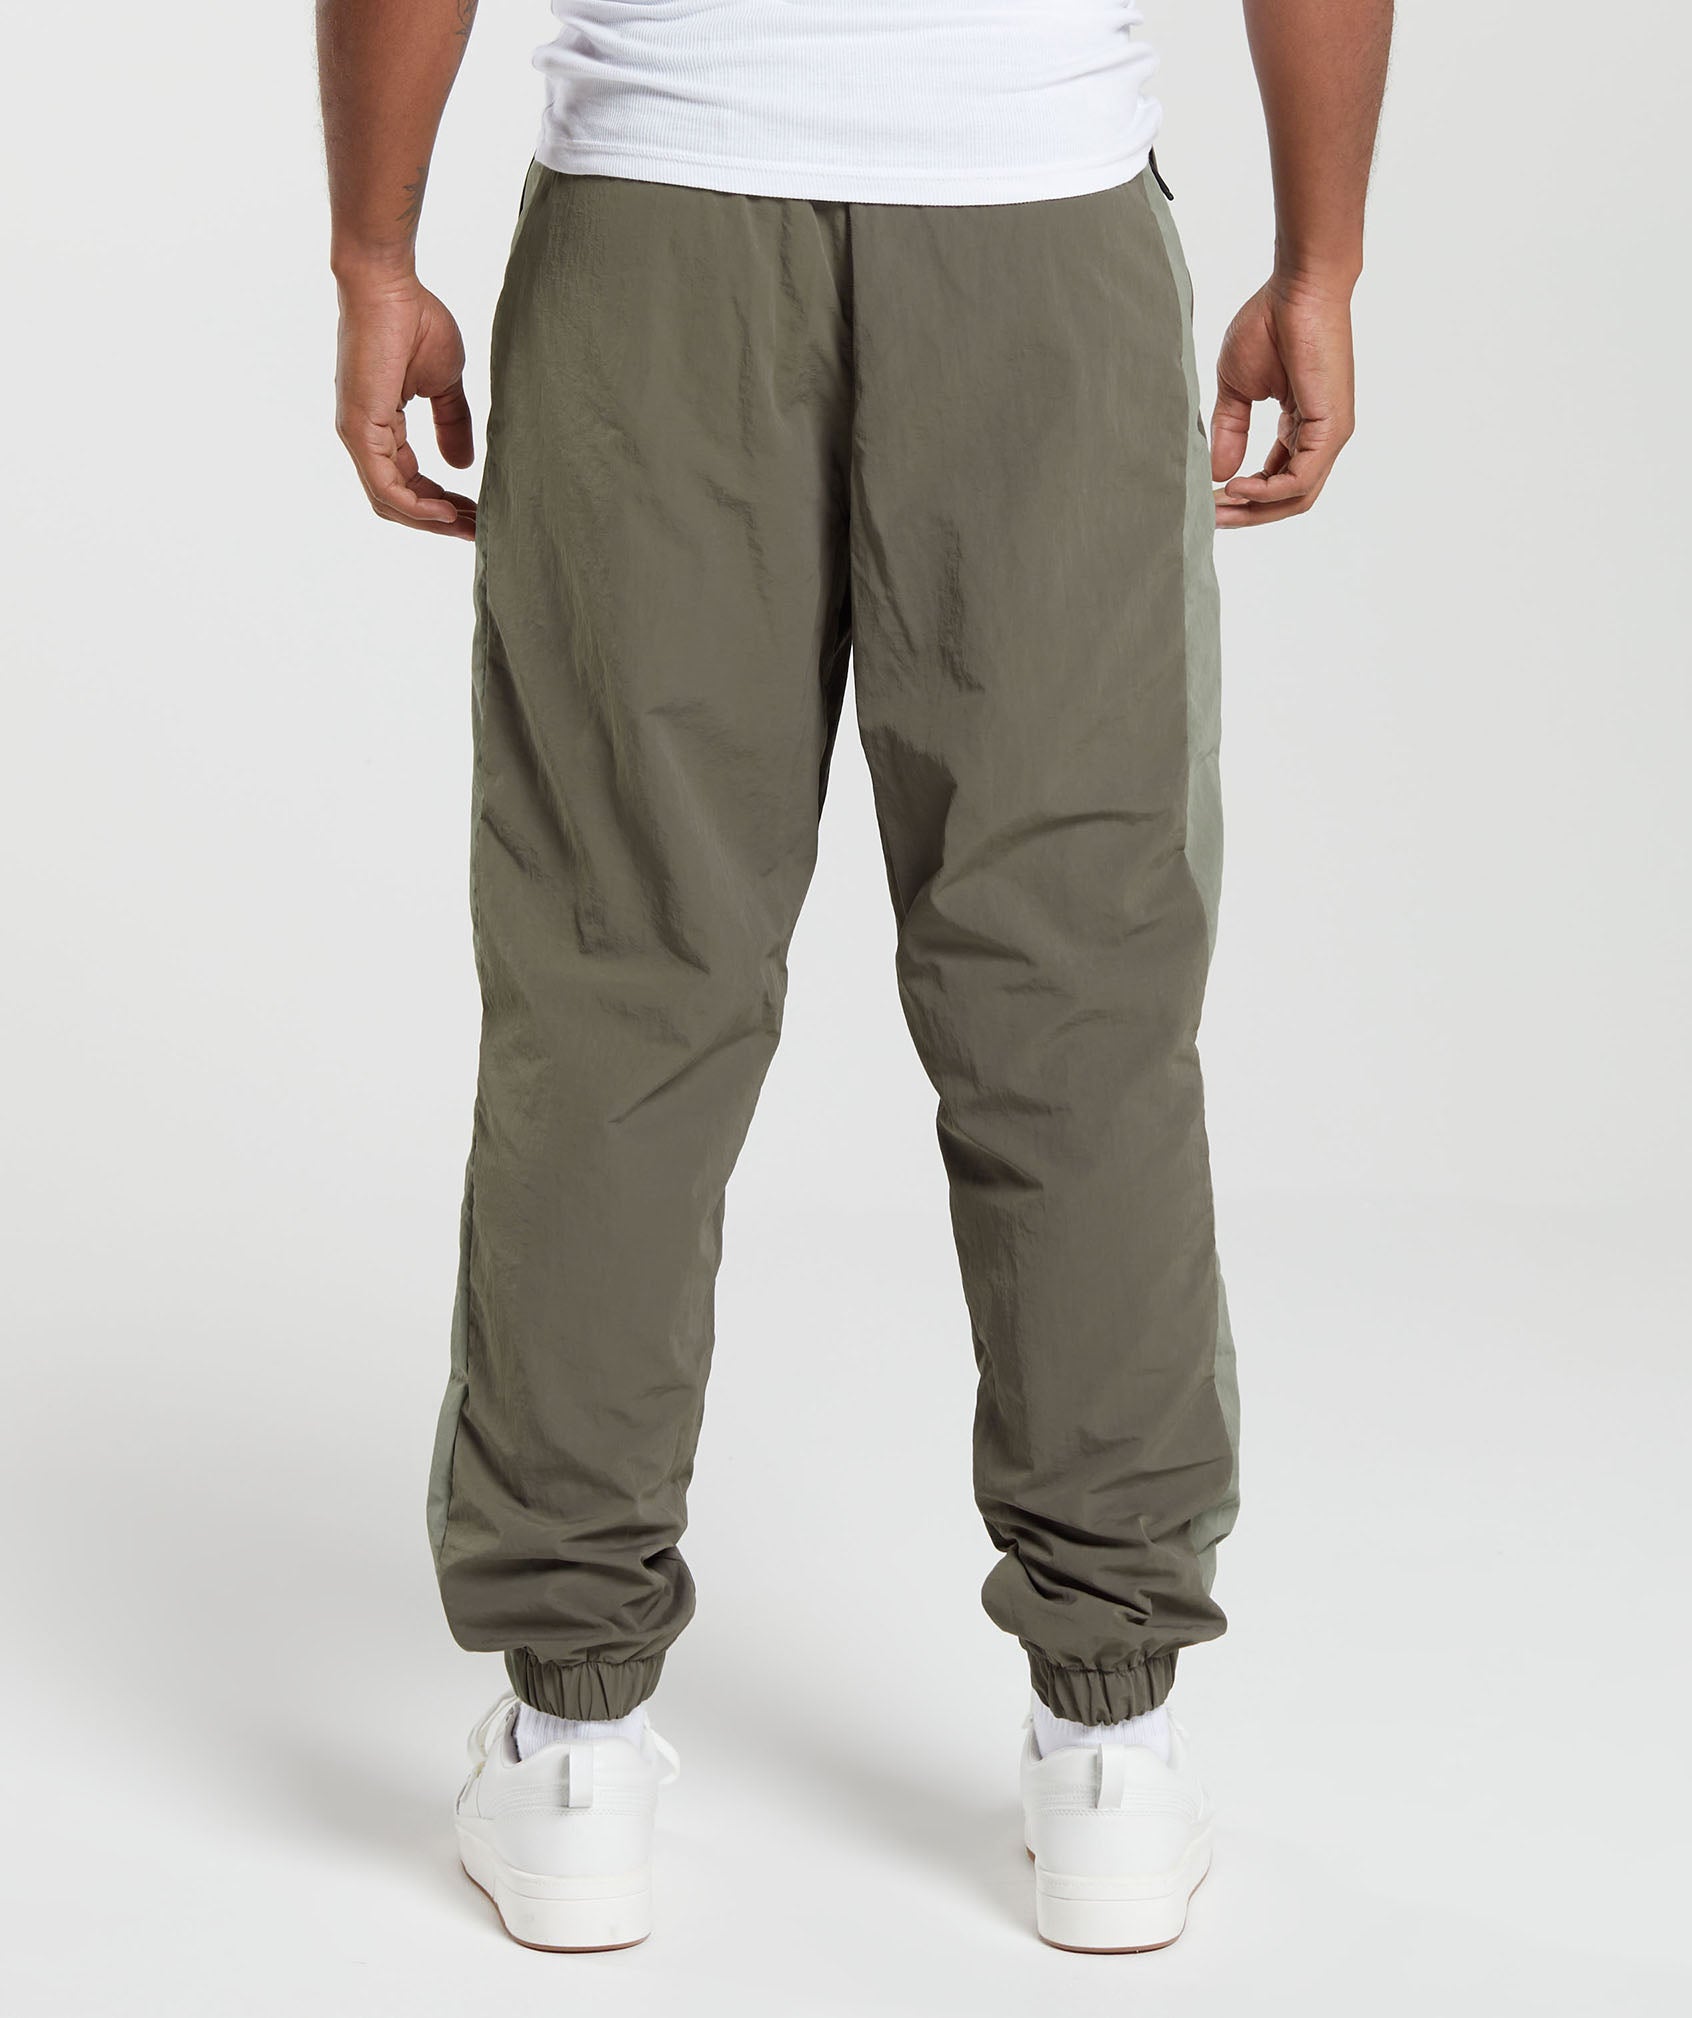 Retro Track Pants in Brown - view 2